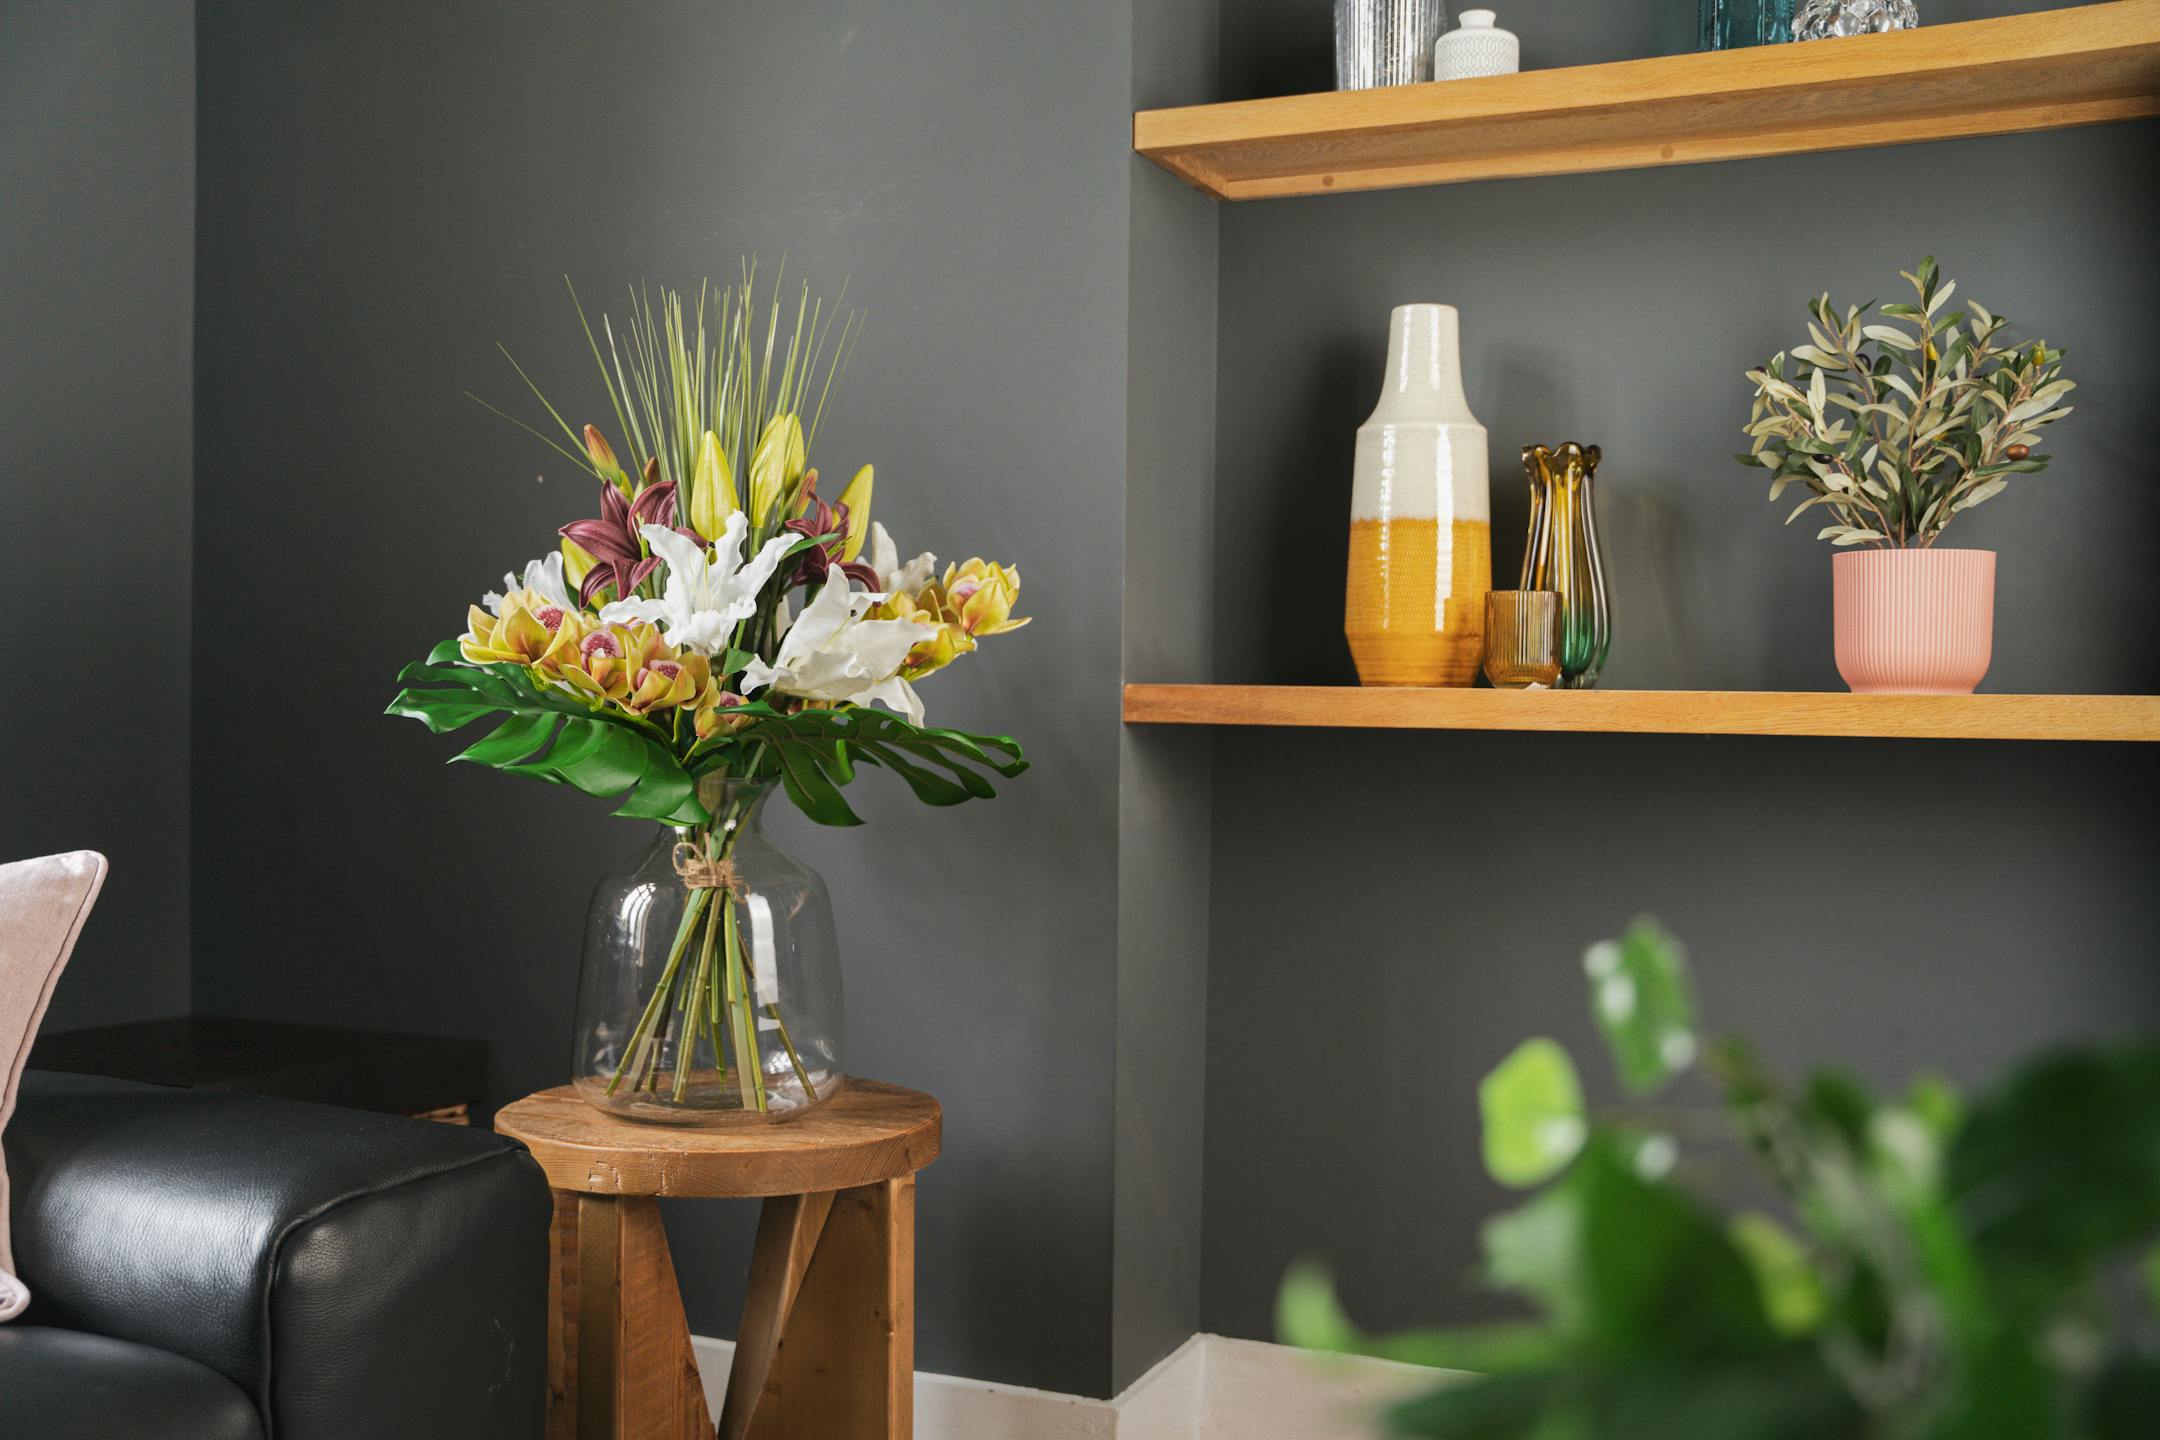 Artificial exotic bouquet against navy wall with shelves